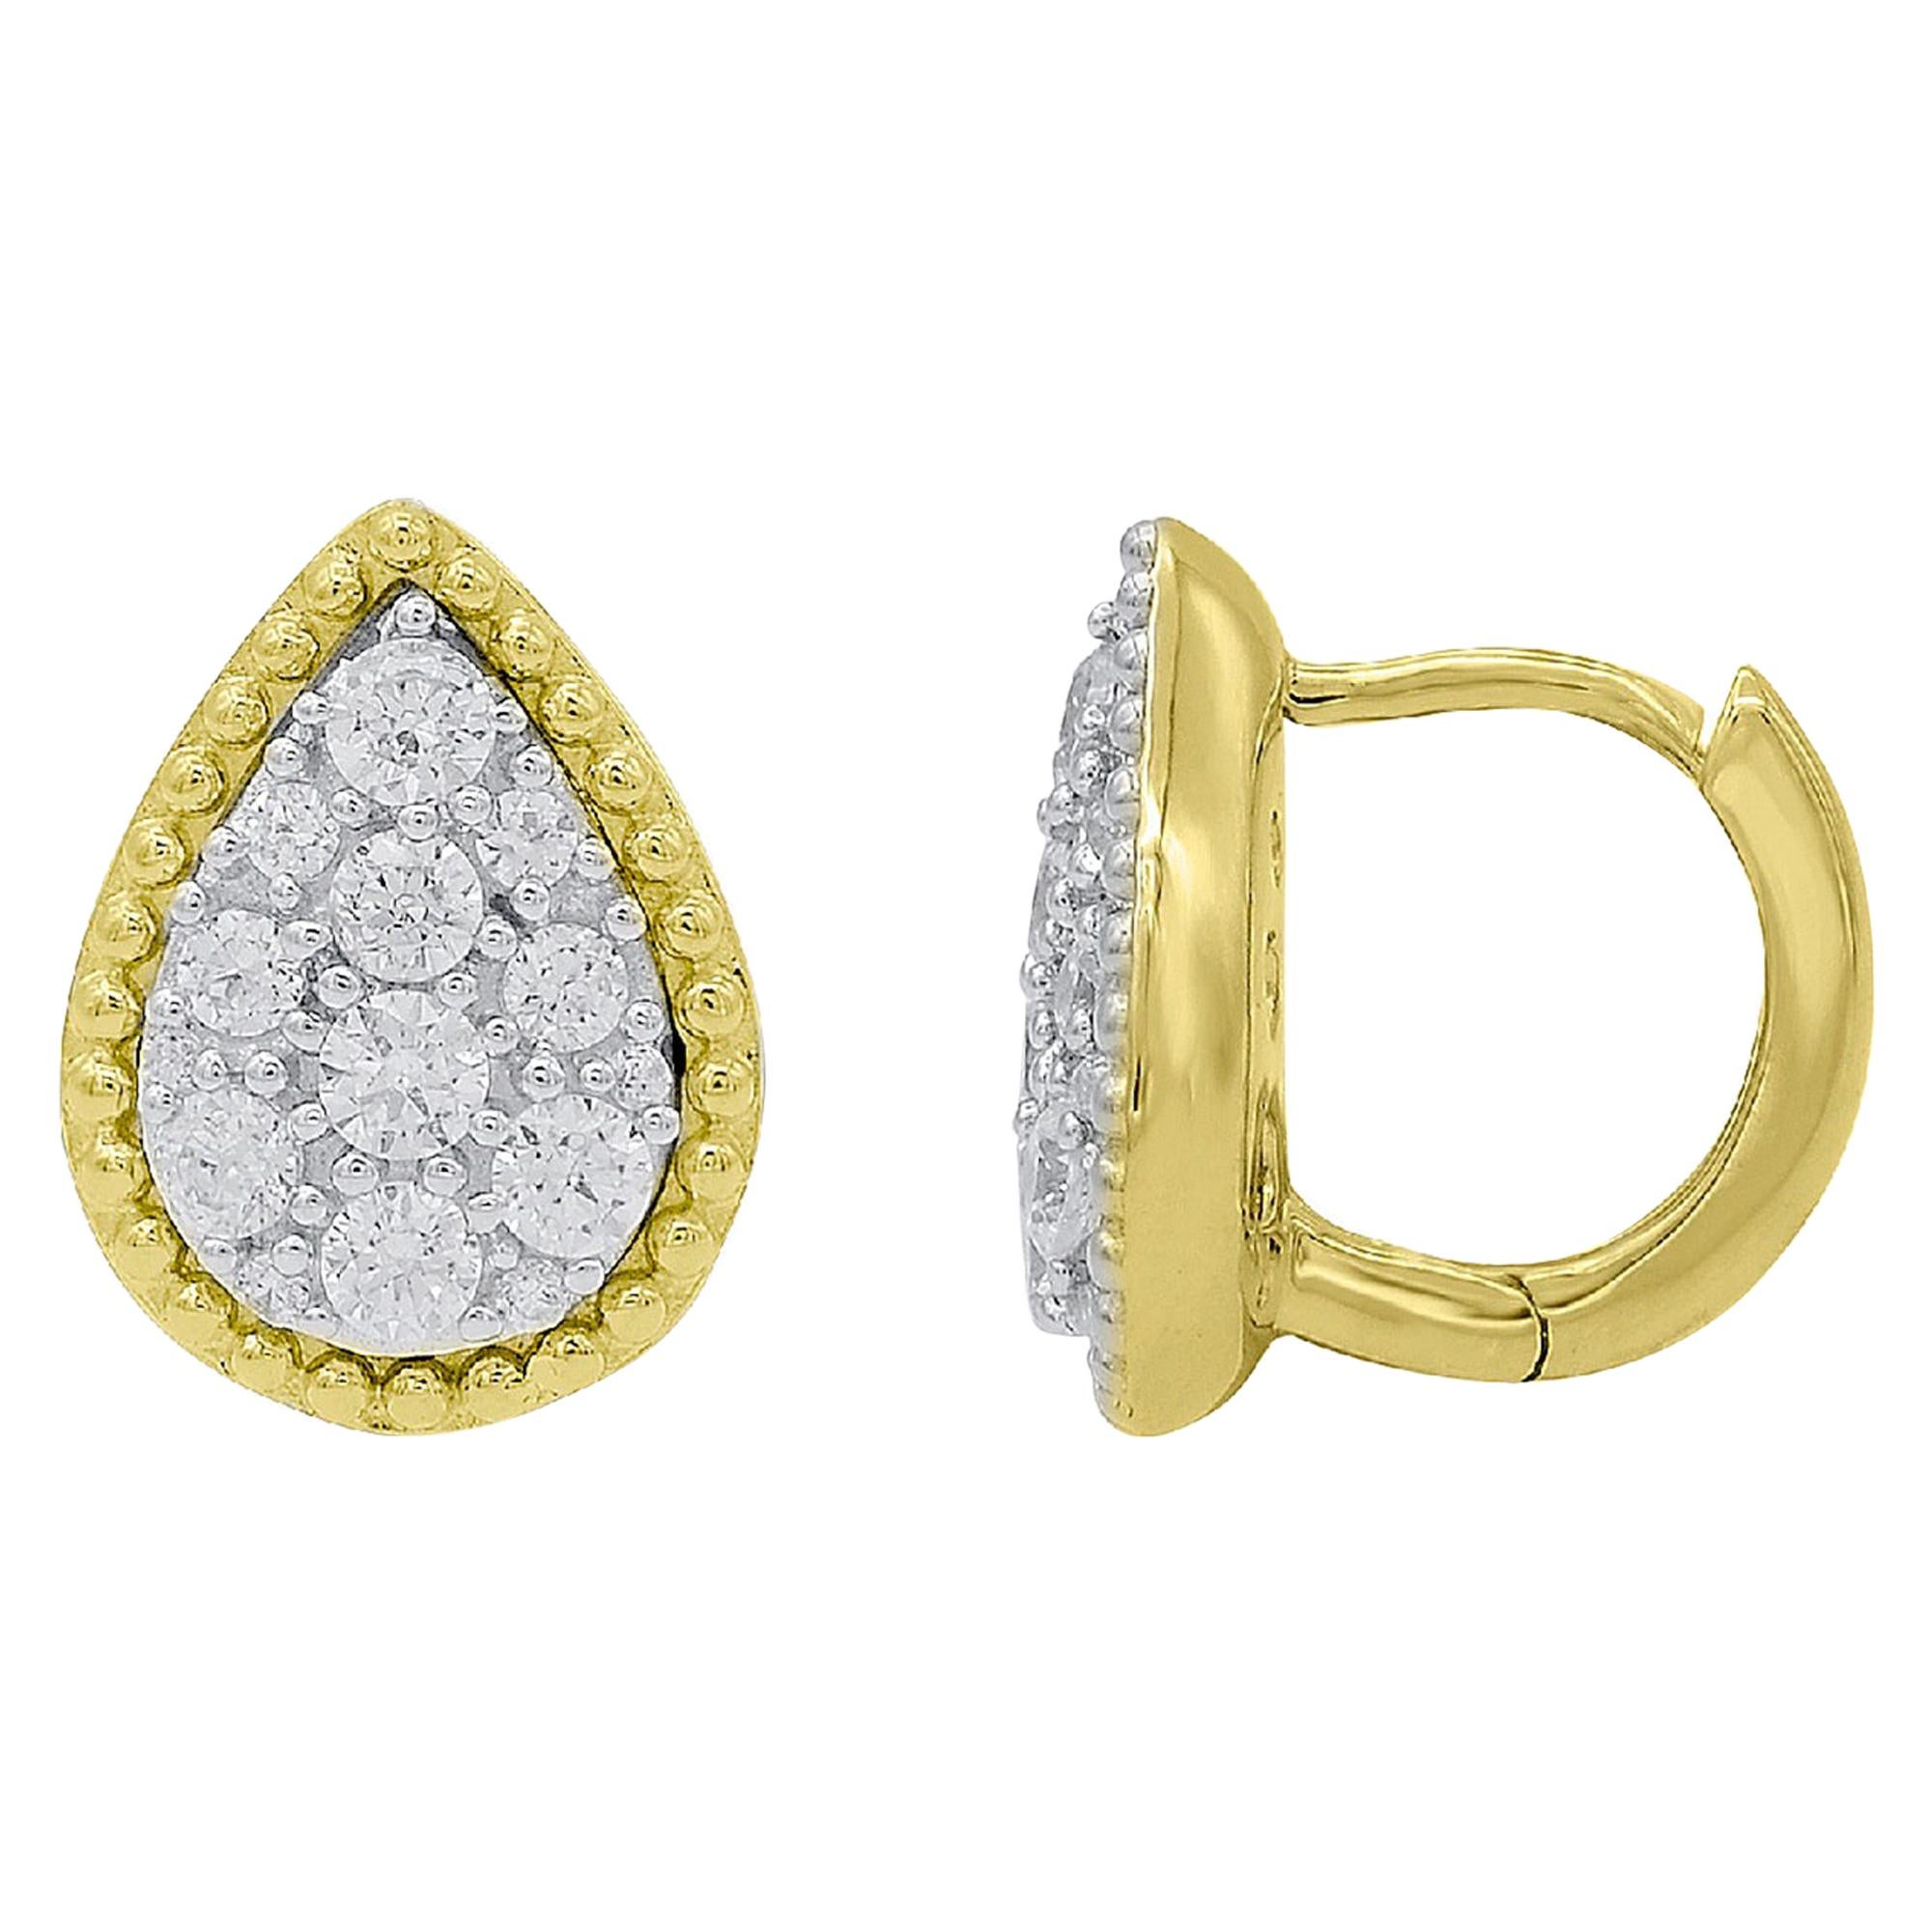 TJD 0.50 Carat Round Diamond 14K Yellow Gold Pear Shaped Cluster Stud Earrings